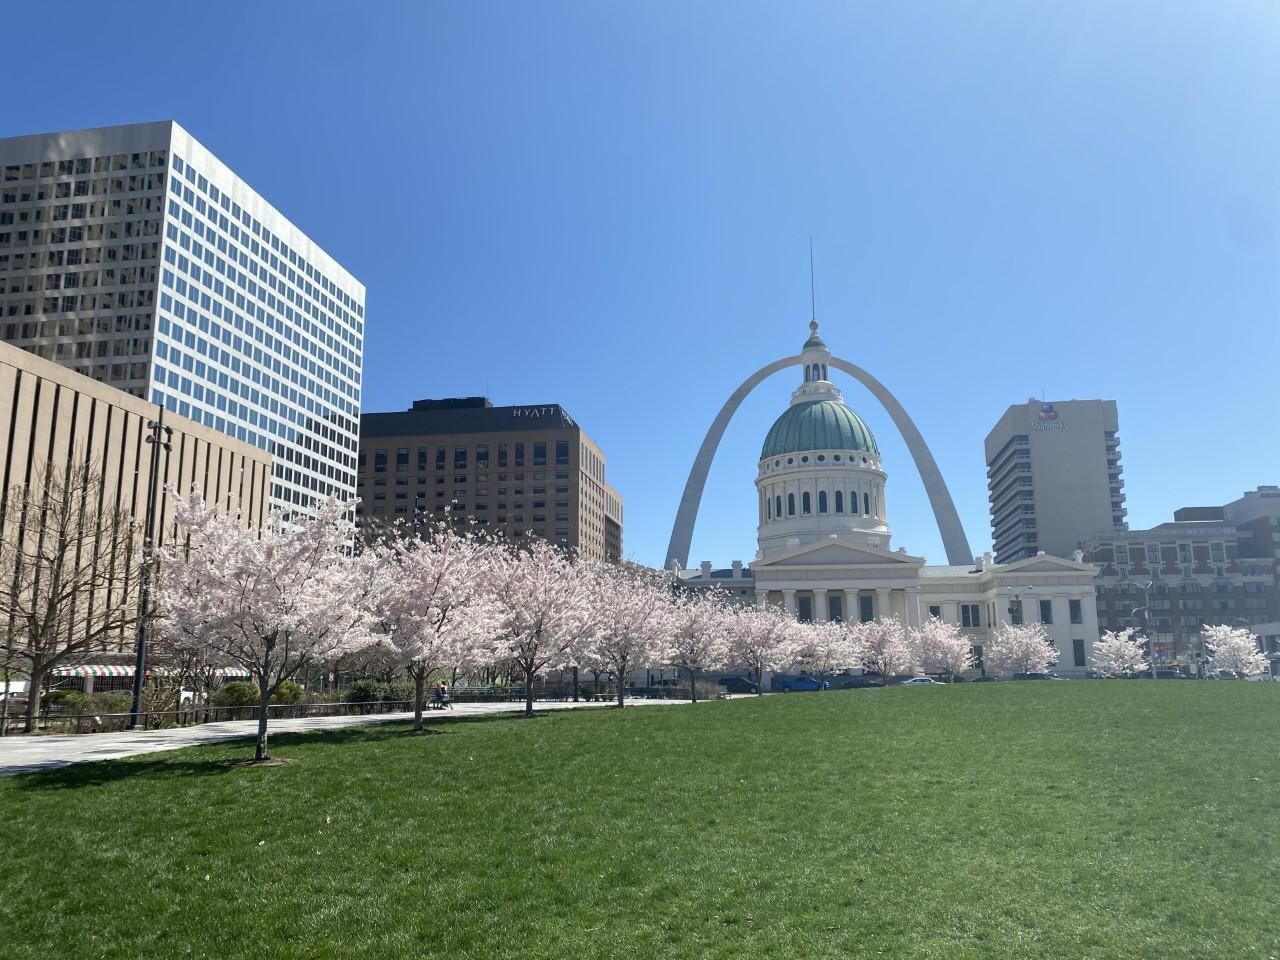 The blooming cherry trees in Kiener Plaza provide a wonderful foreground for the Gateway Arch and Old Courthouse in spring.